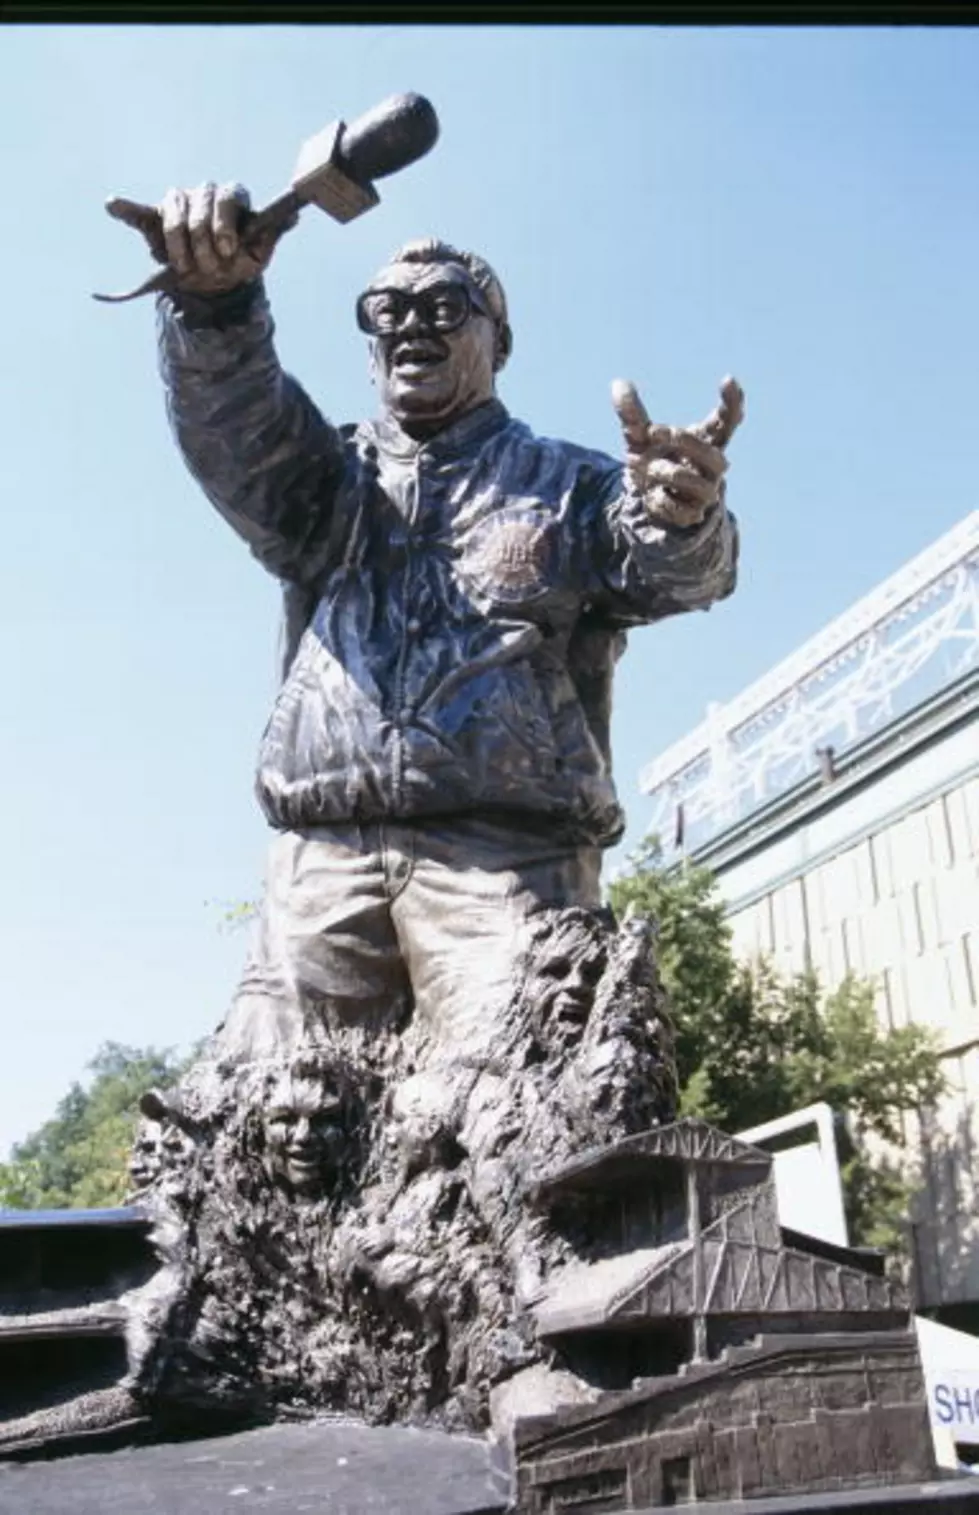 Harry Caray … and Bozo The Clown? [Video]